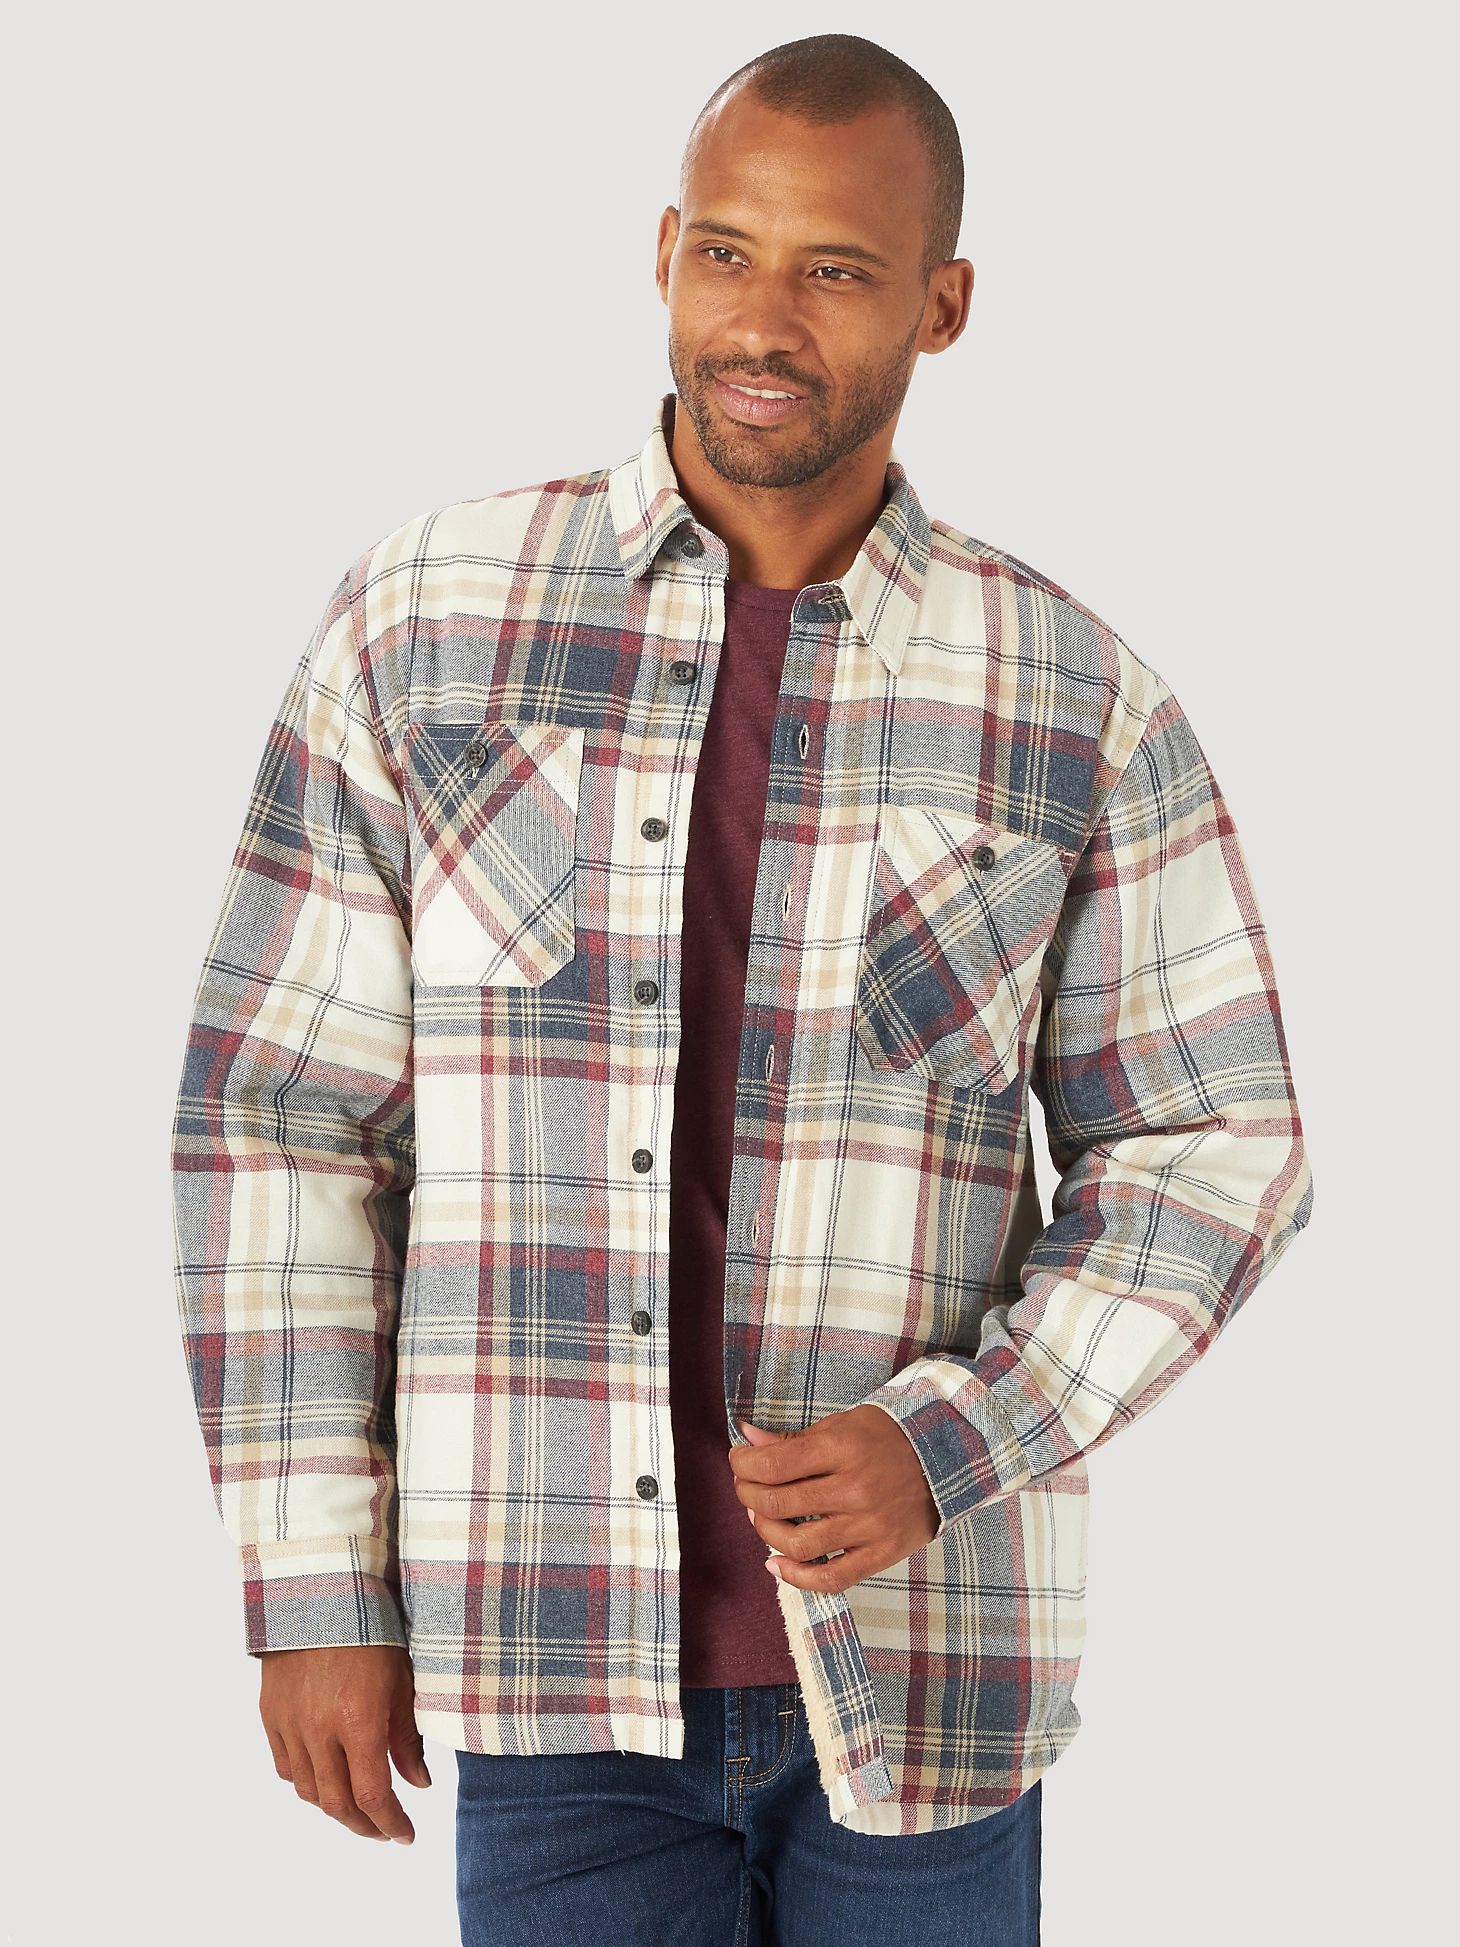 Men's Wrangler® Authentics Sherpa Lined Flannel Shirt in Twill Heather | Wrangler